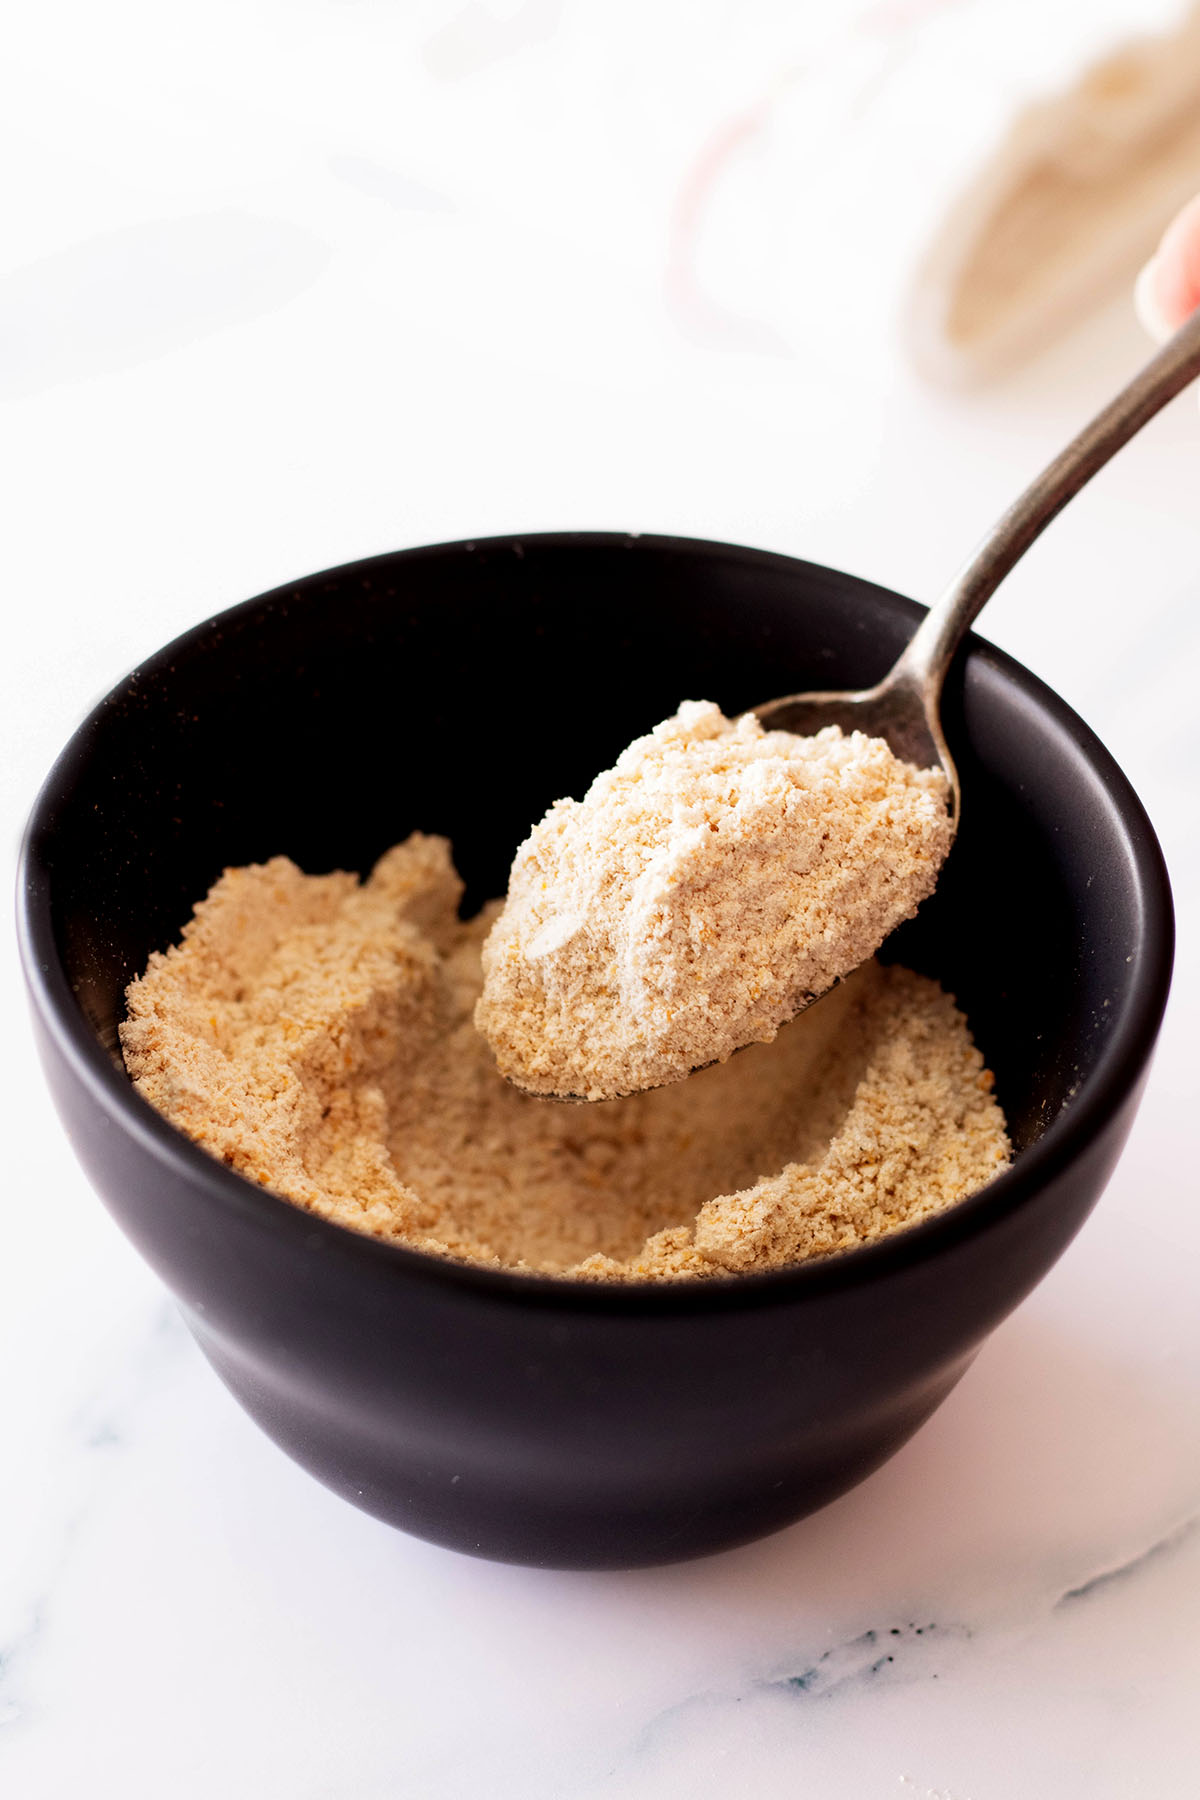 Oat flour in a small black bowl with a spoon.